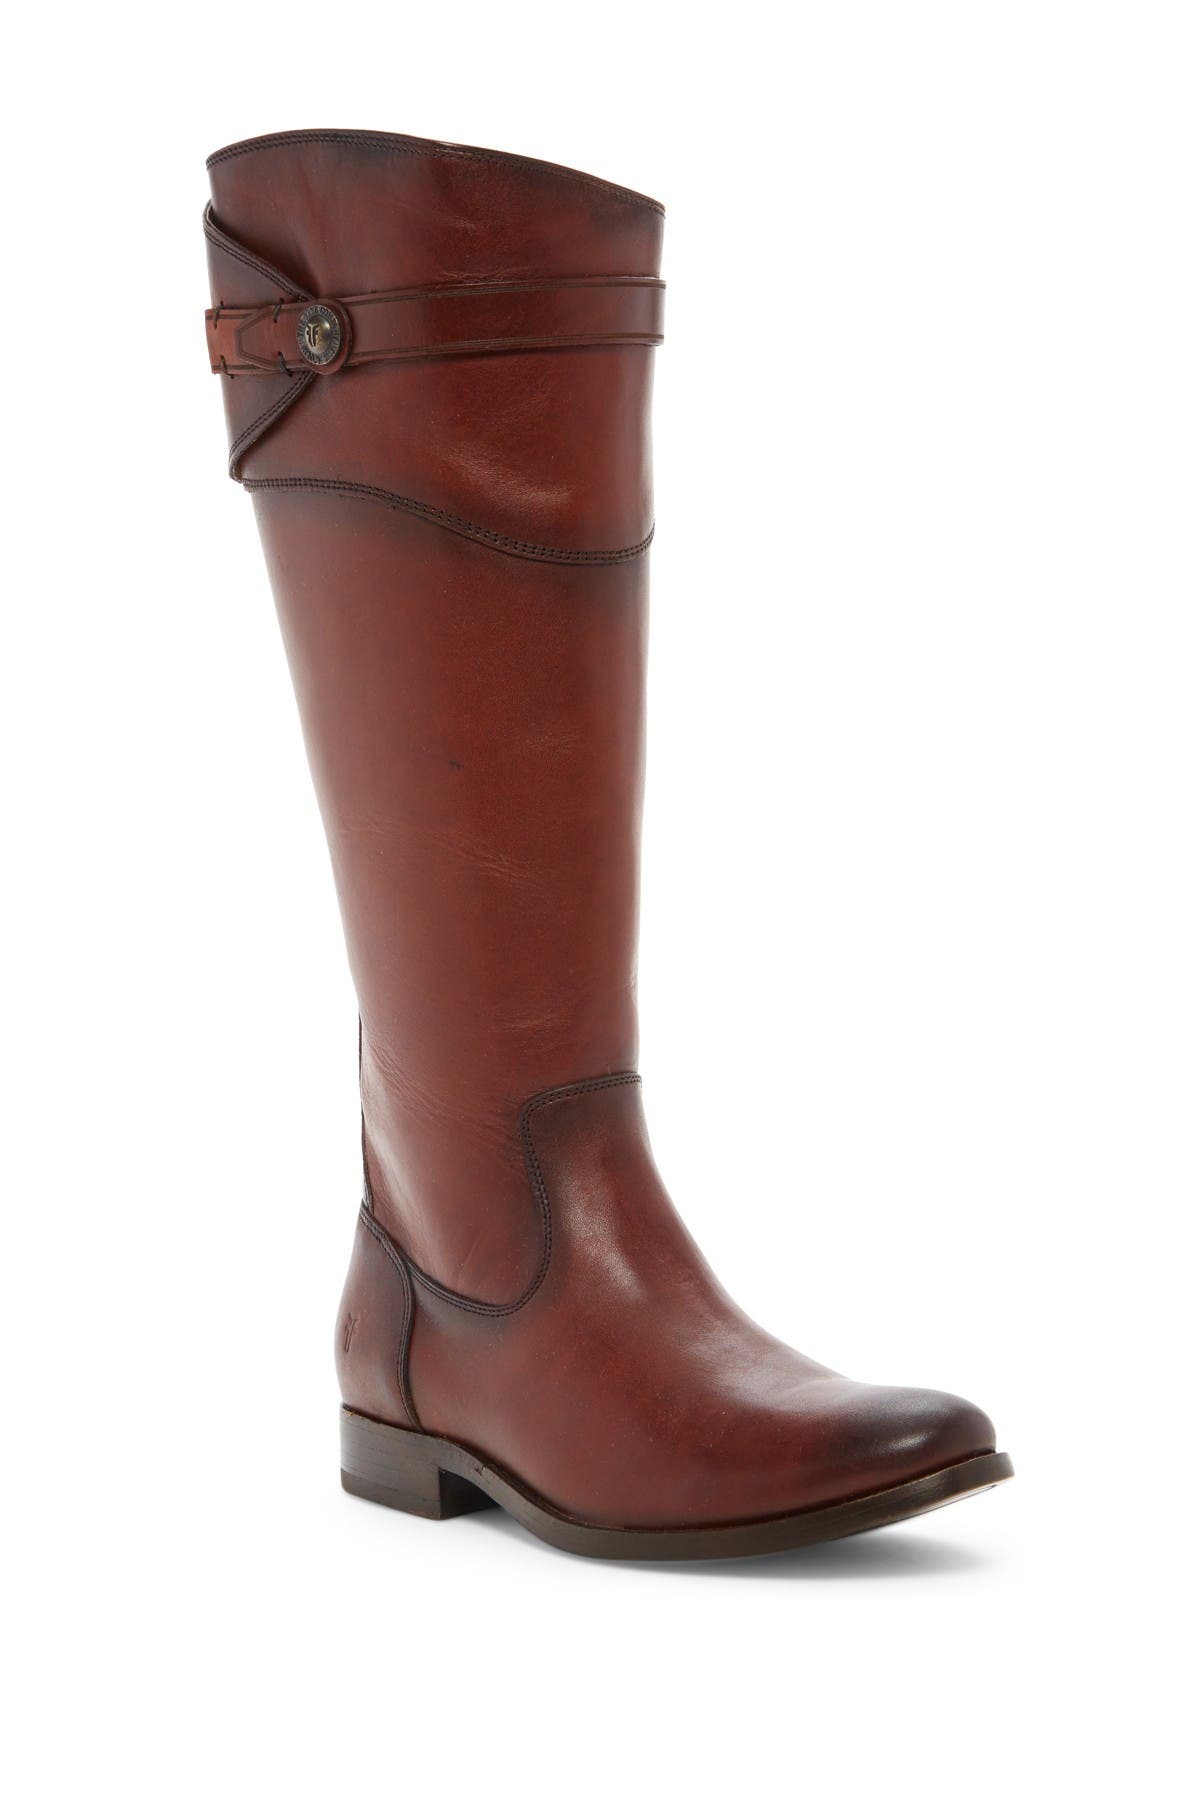 Frye | Molly Knee High Boot | Nordstrom 